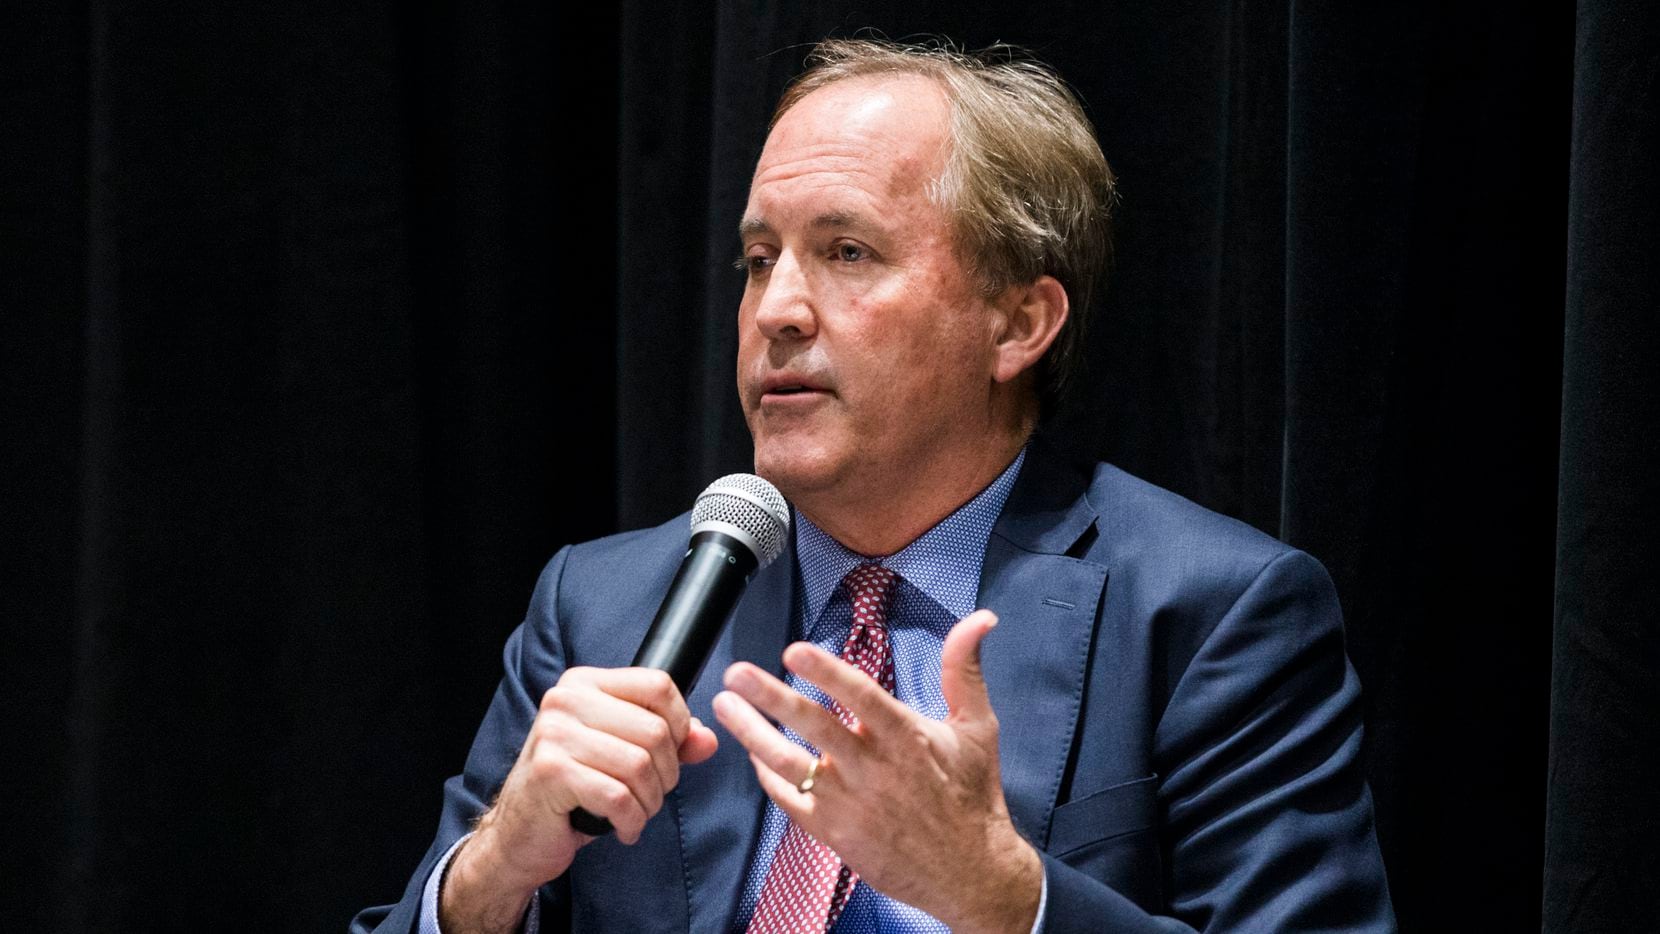 Texas Attorney General Ken Paxton is pictured on Wednesday, February 26, 2020 at The Dallas...